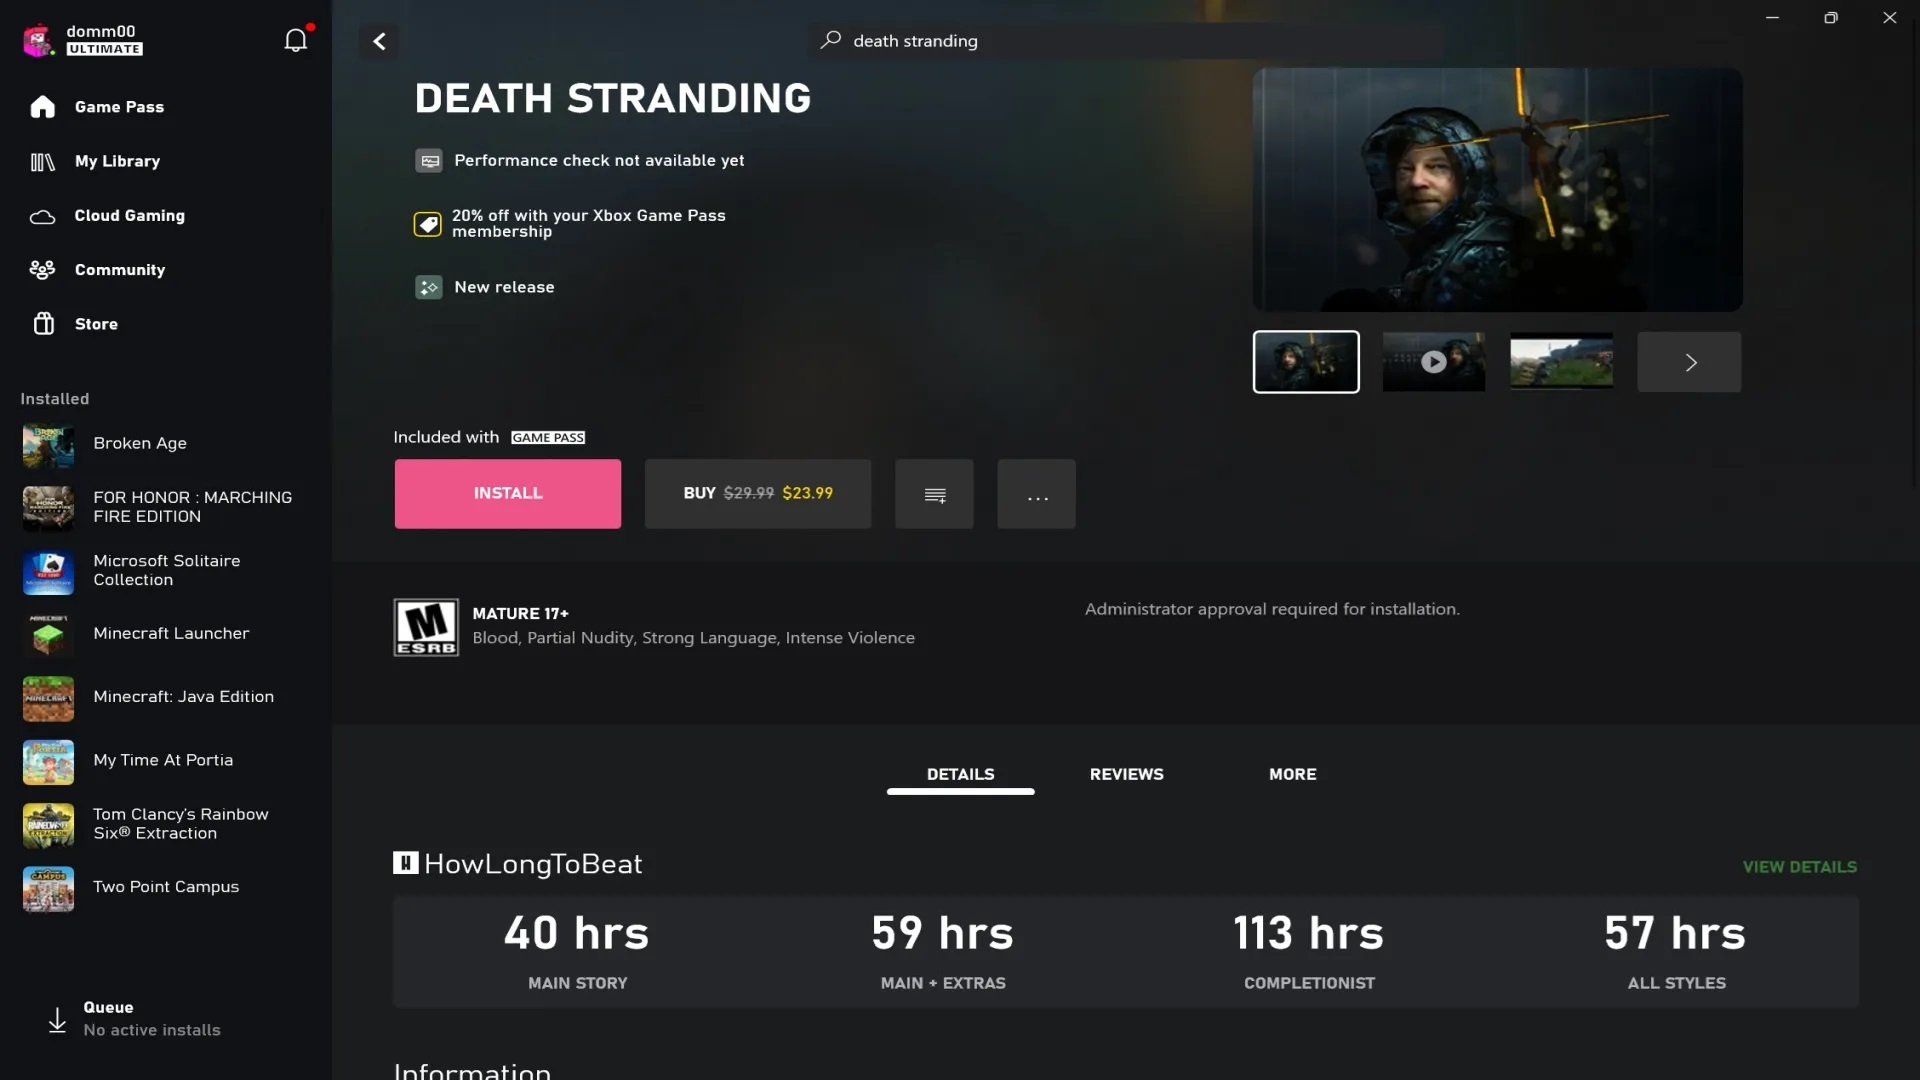 Screenshot showing PC Game Pass HowLongToBeat integration with various completion times for death stranding